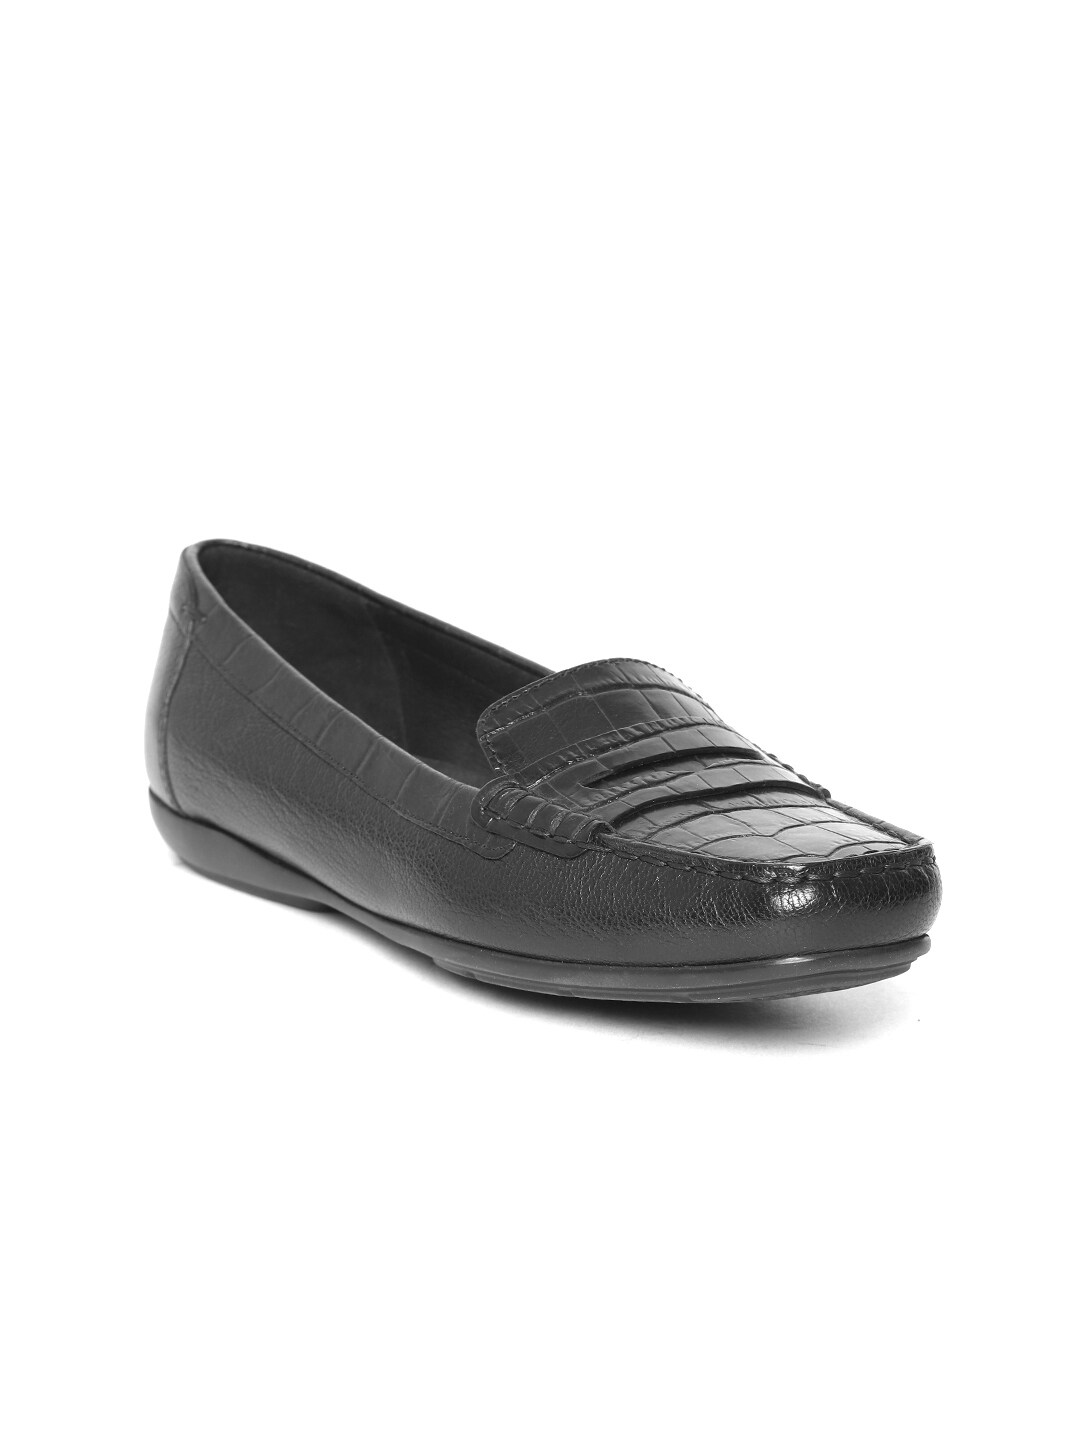 Geox Women Black Leather Croc Textured Loafers Price in India